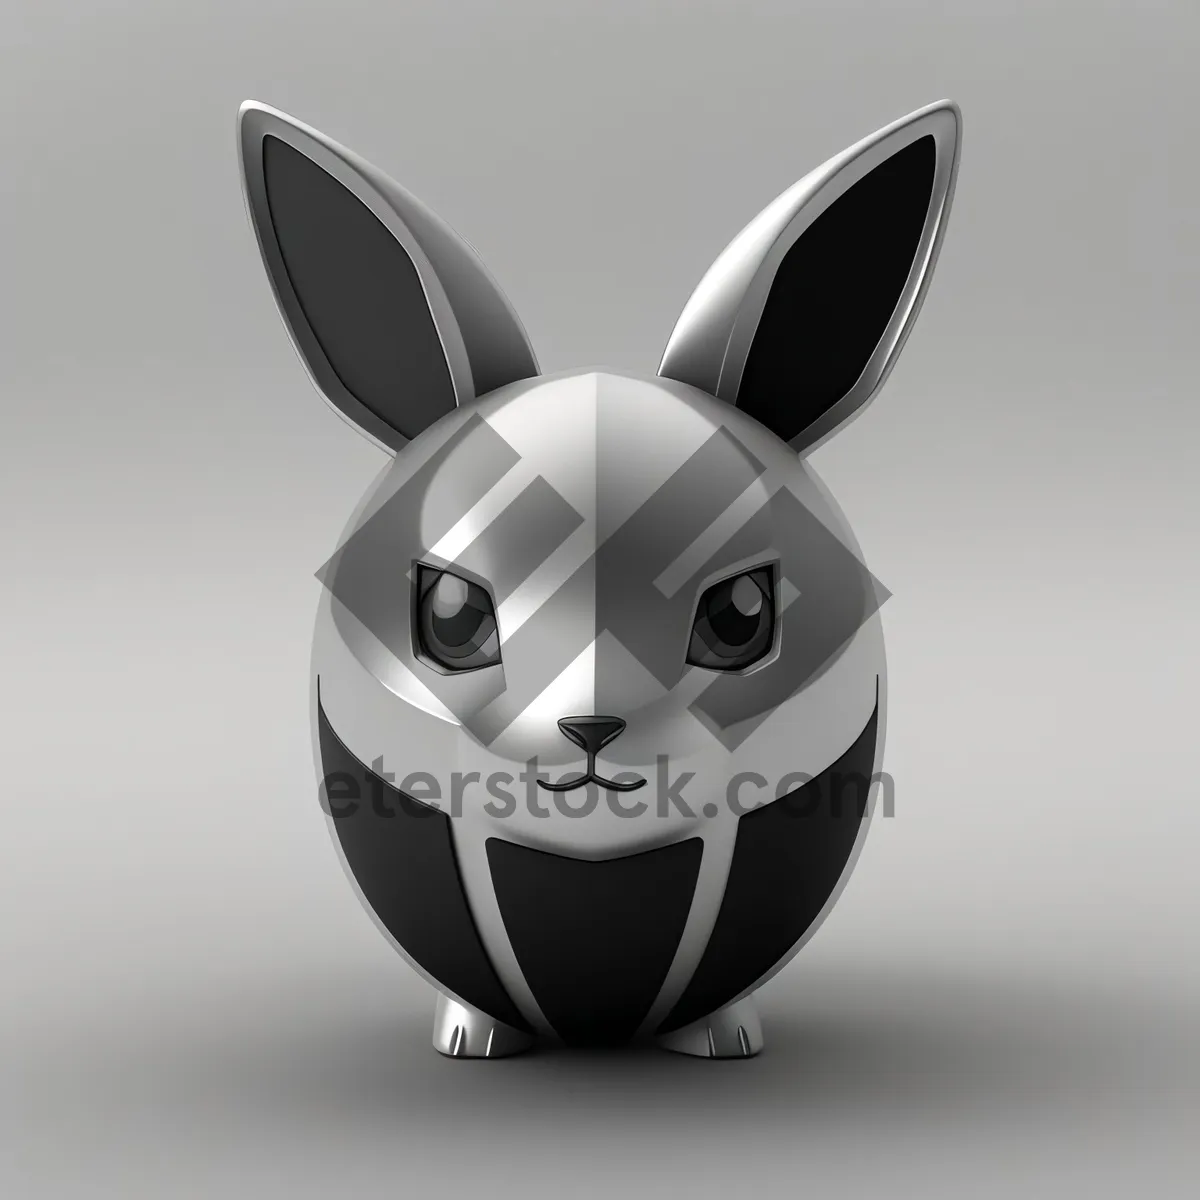 Picture of Happy Rabbit Cartoon Icon with Cute Facial Expression